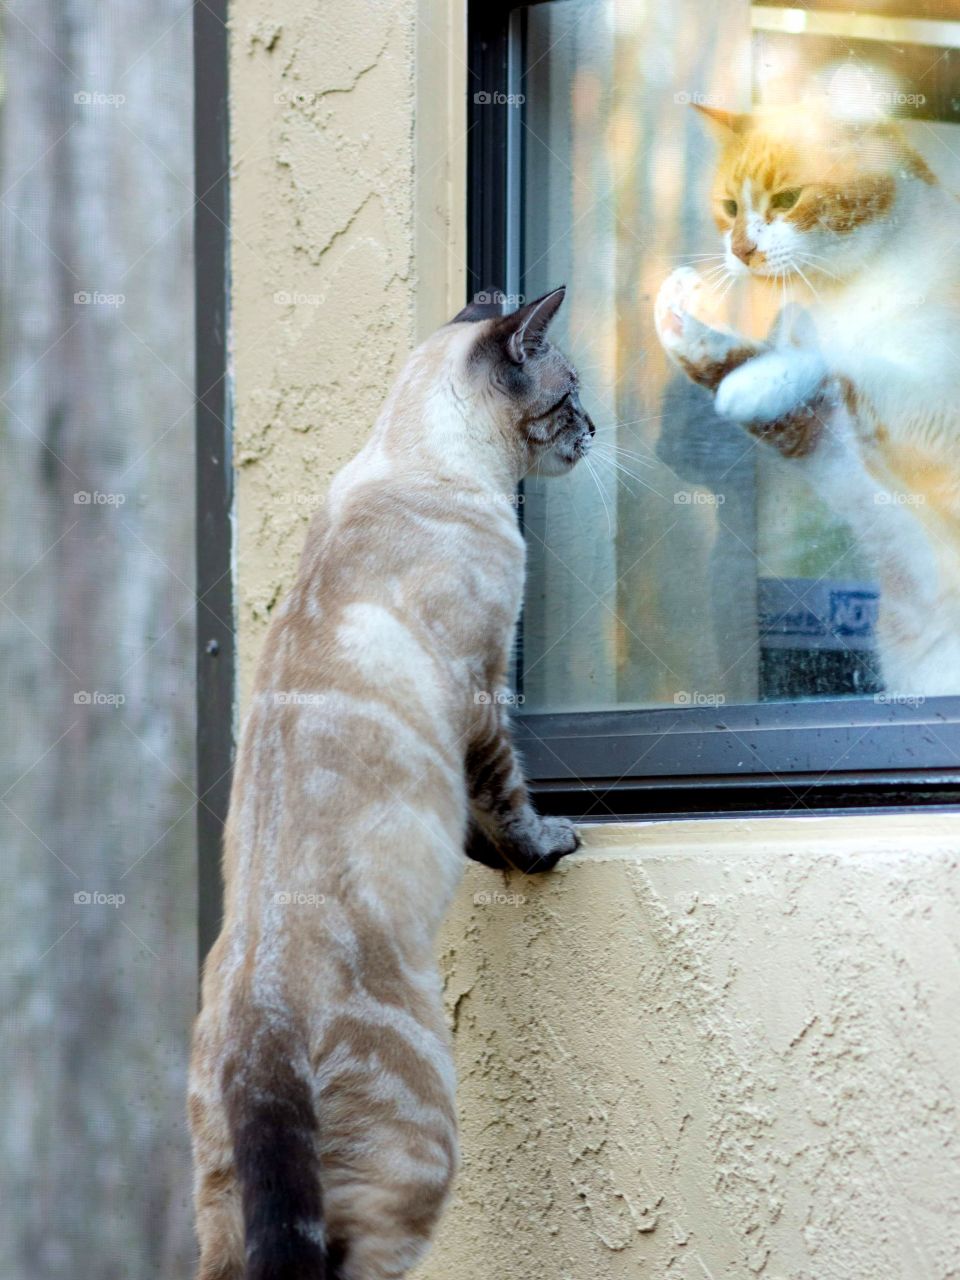 adorable image of two cats in a social distance situation separated by a window but attempting to communicate